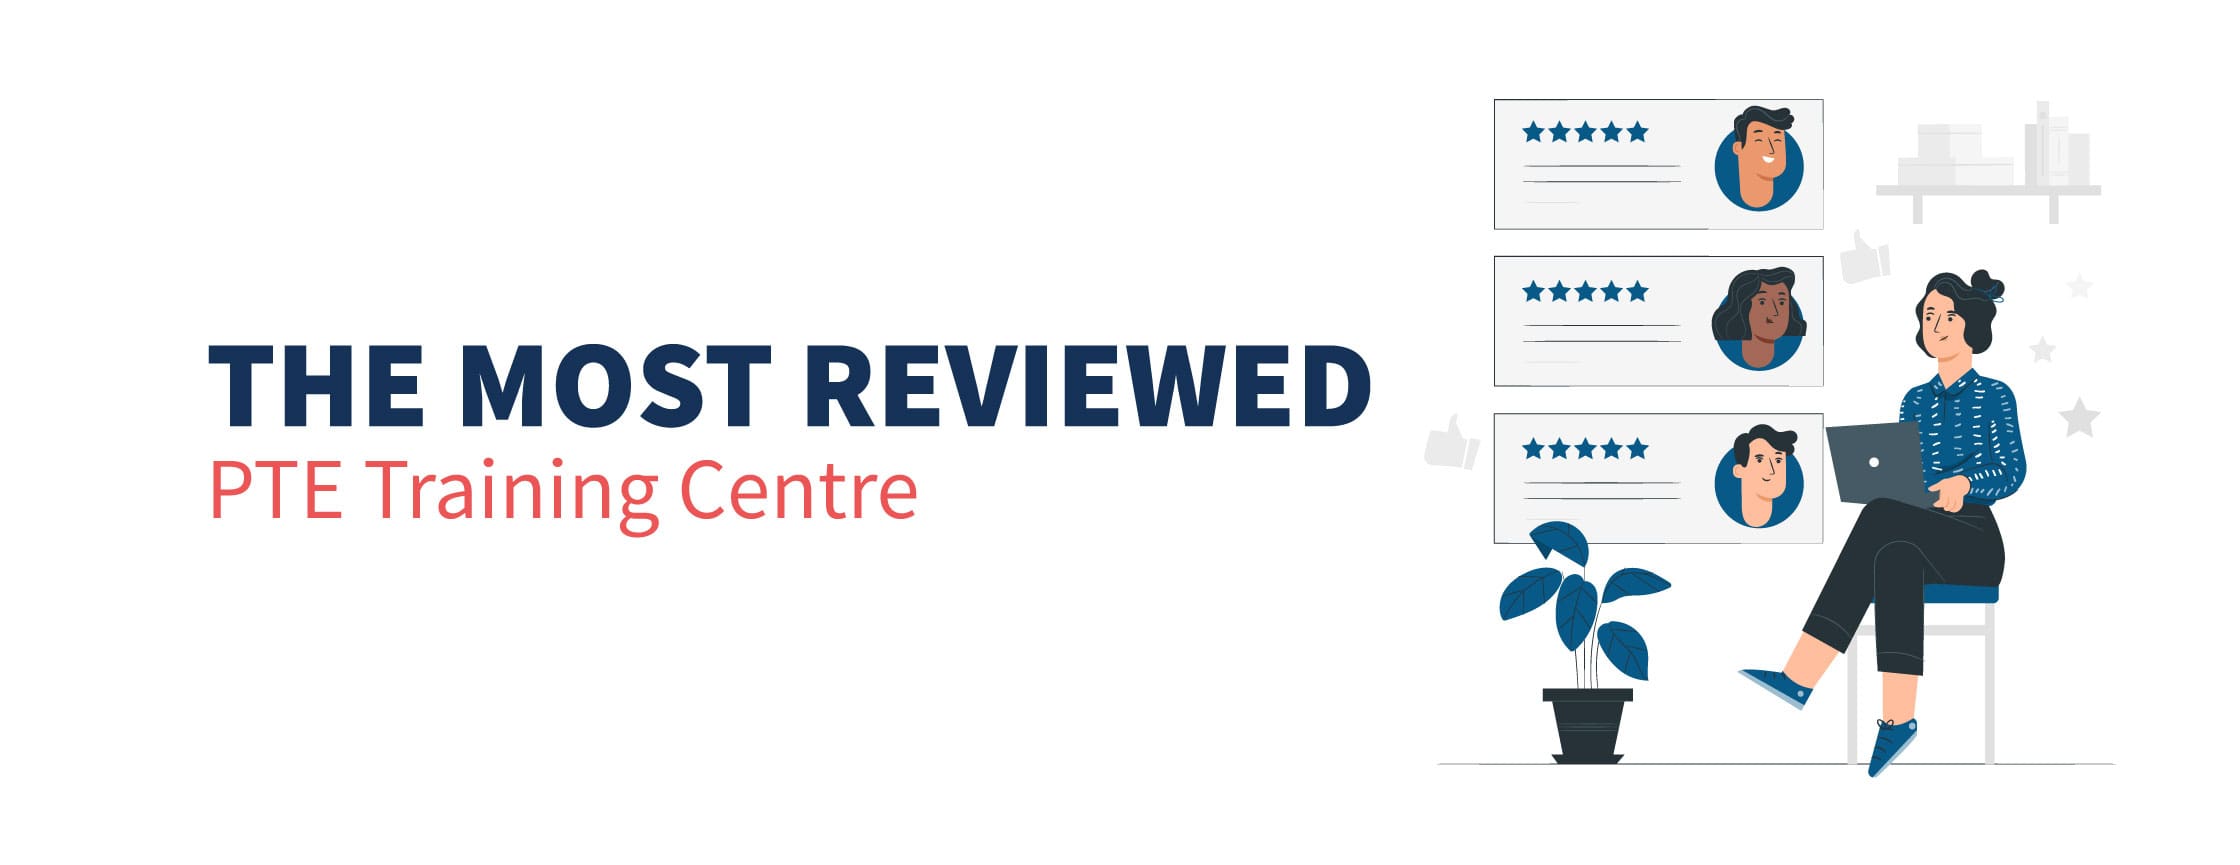 The Most Reviewed PTE Training Centre